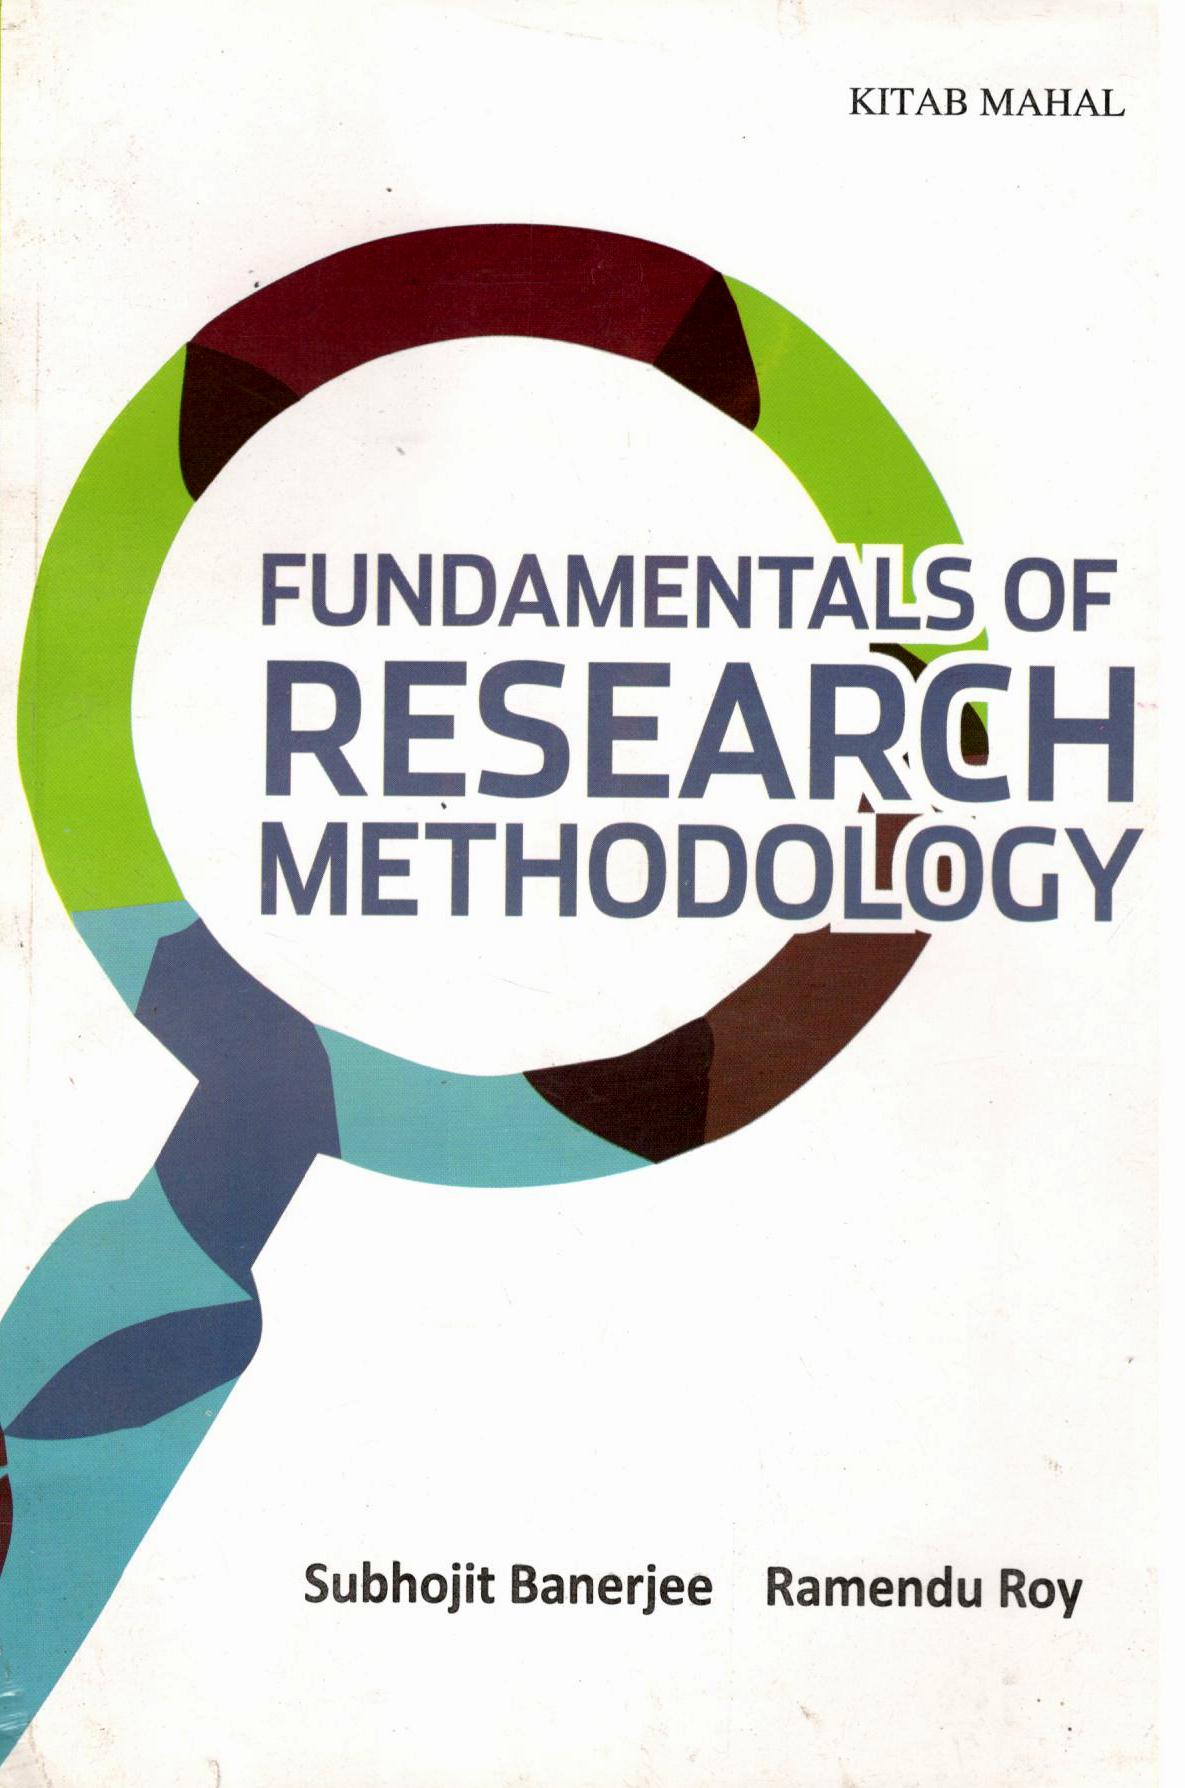 books of research methodology